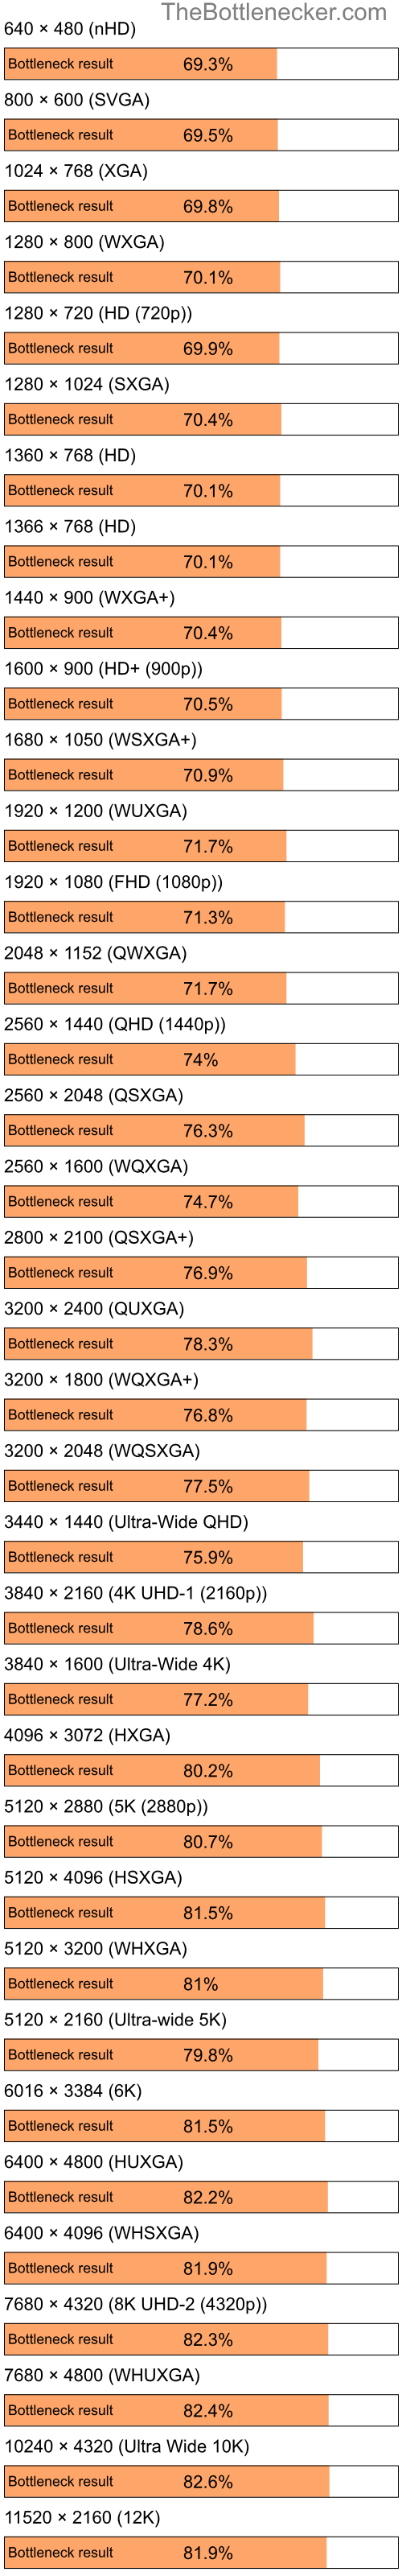 Bottleneck results by resolution for Intel Pentium 4 and AMD M880G with Mobility Radeon HD 4250 in Graphic Card Intense Tasks